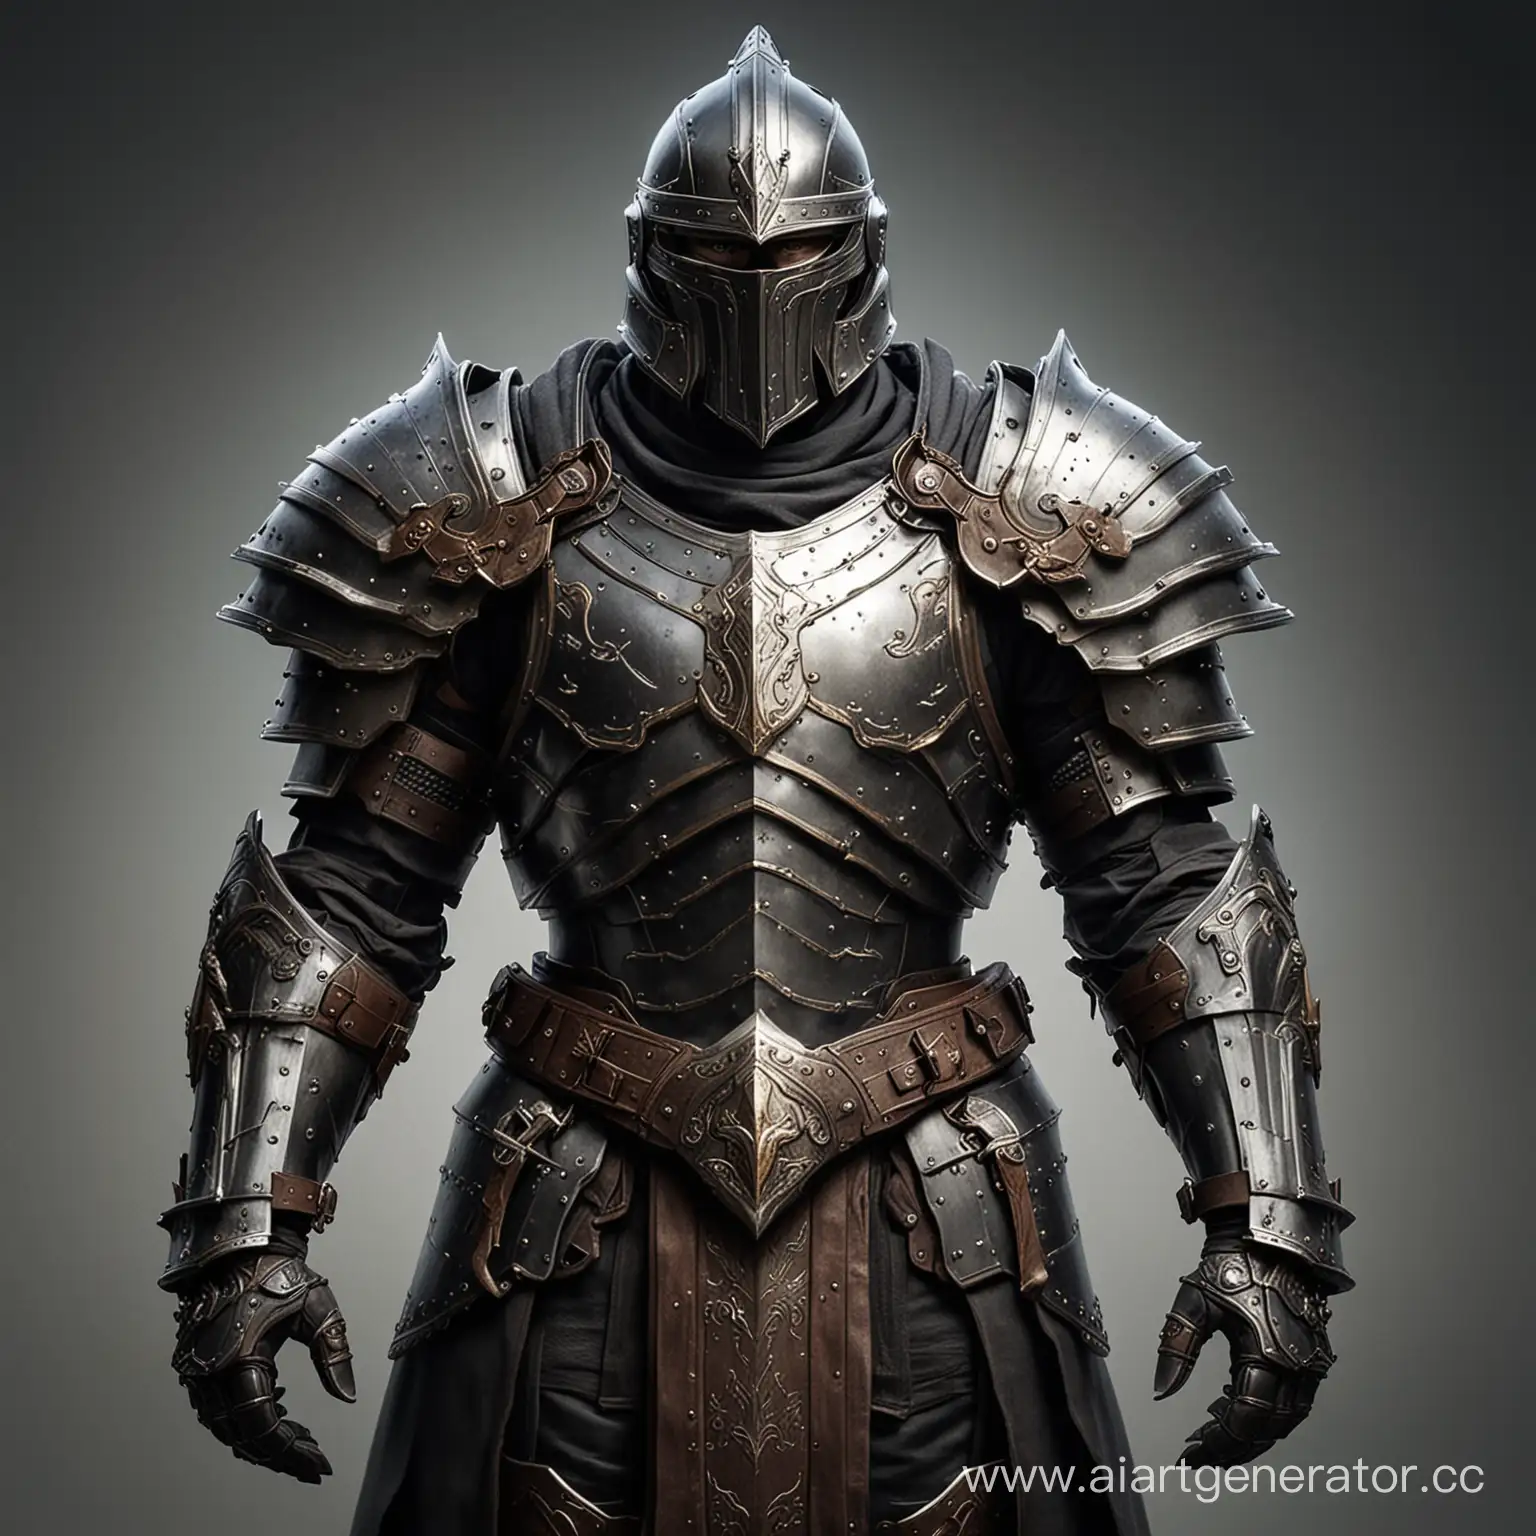 Paladin, heavy plated armor with a closed helmet and enormous shoulder pads, tall, dark fantasy
